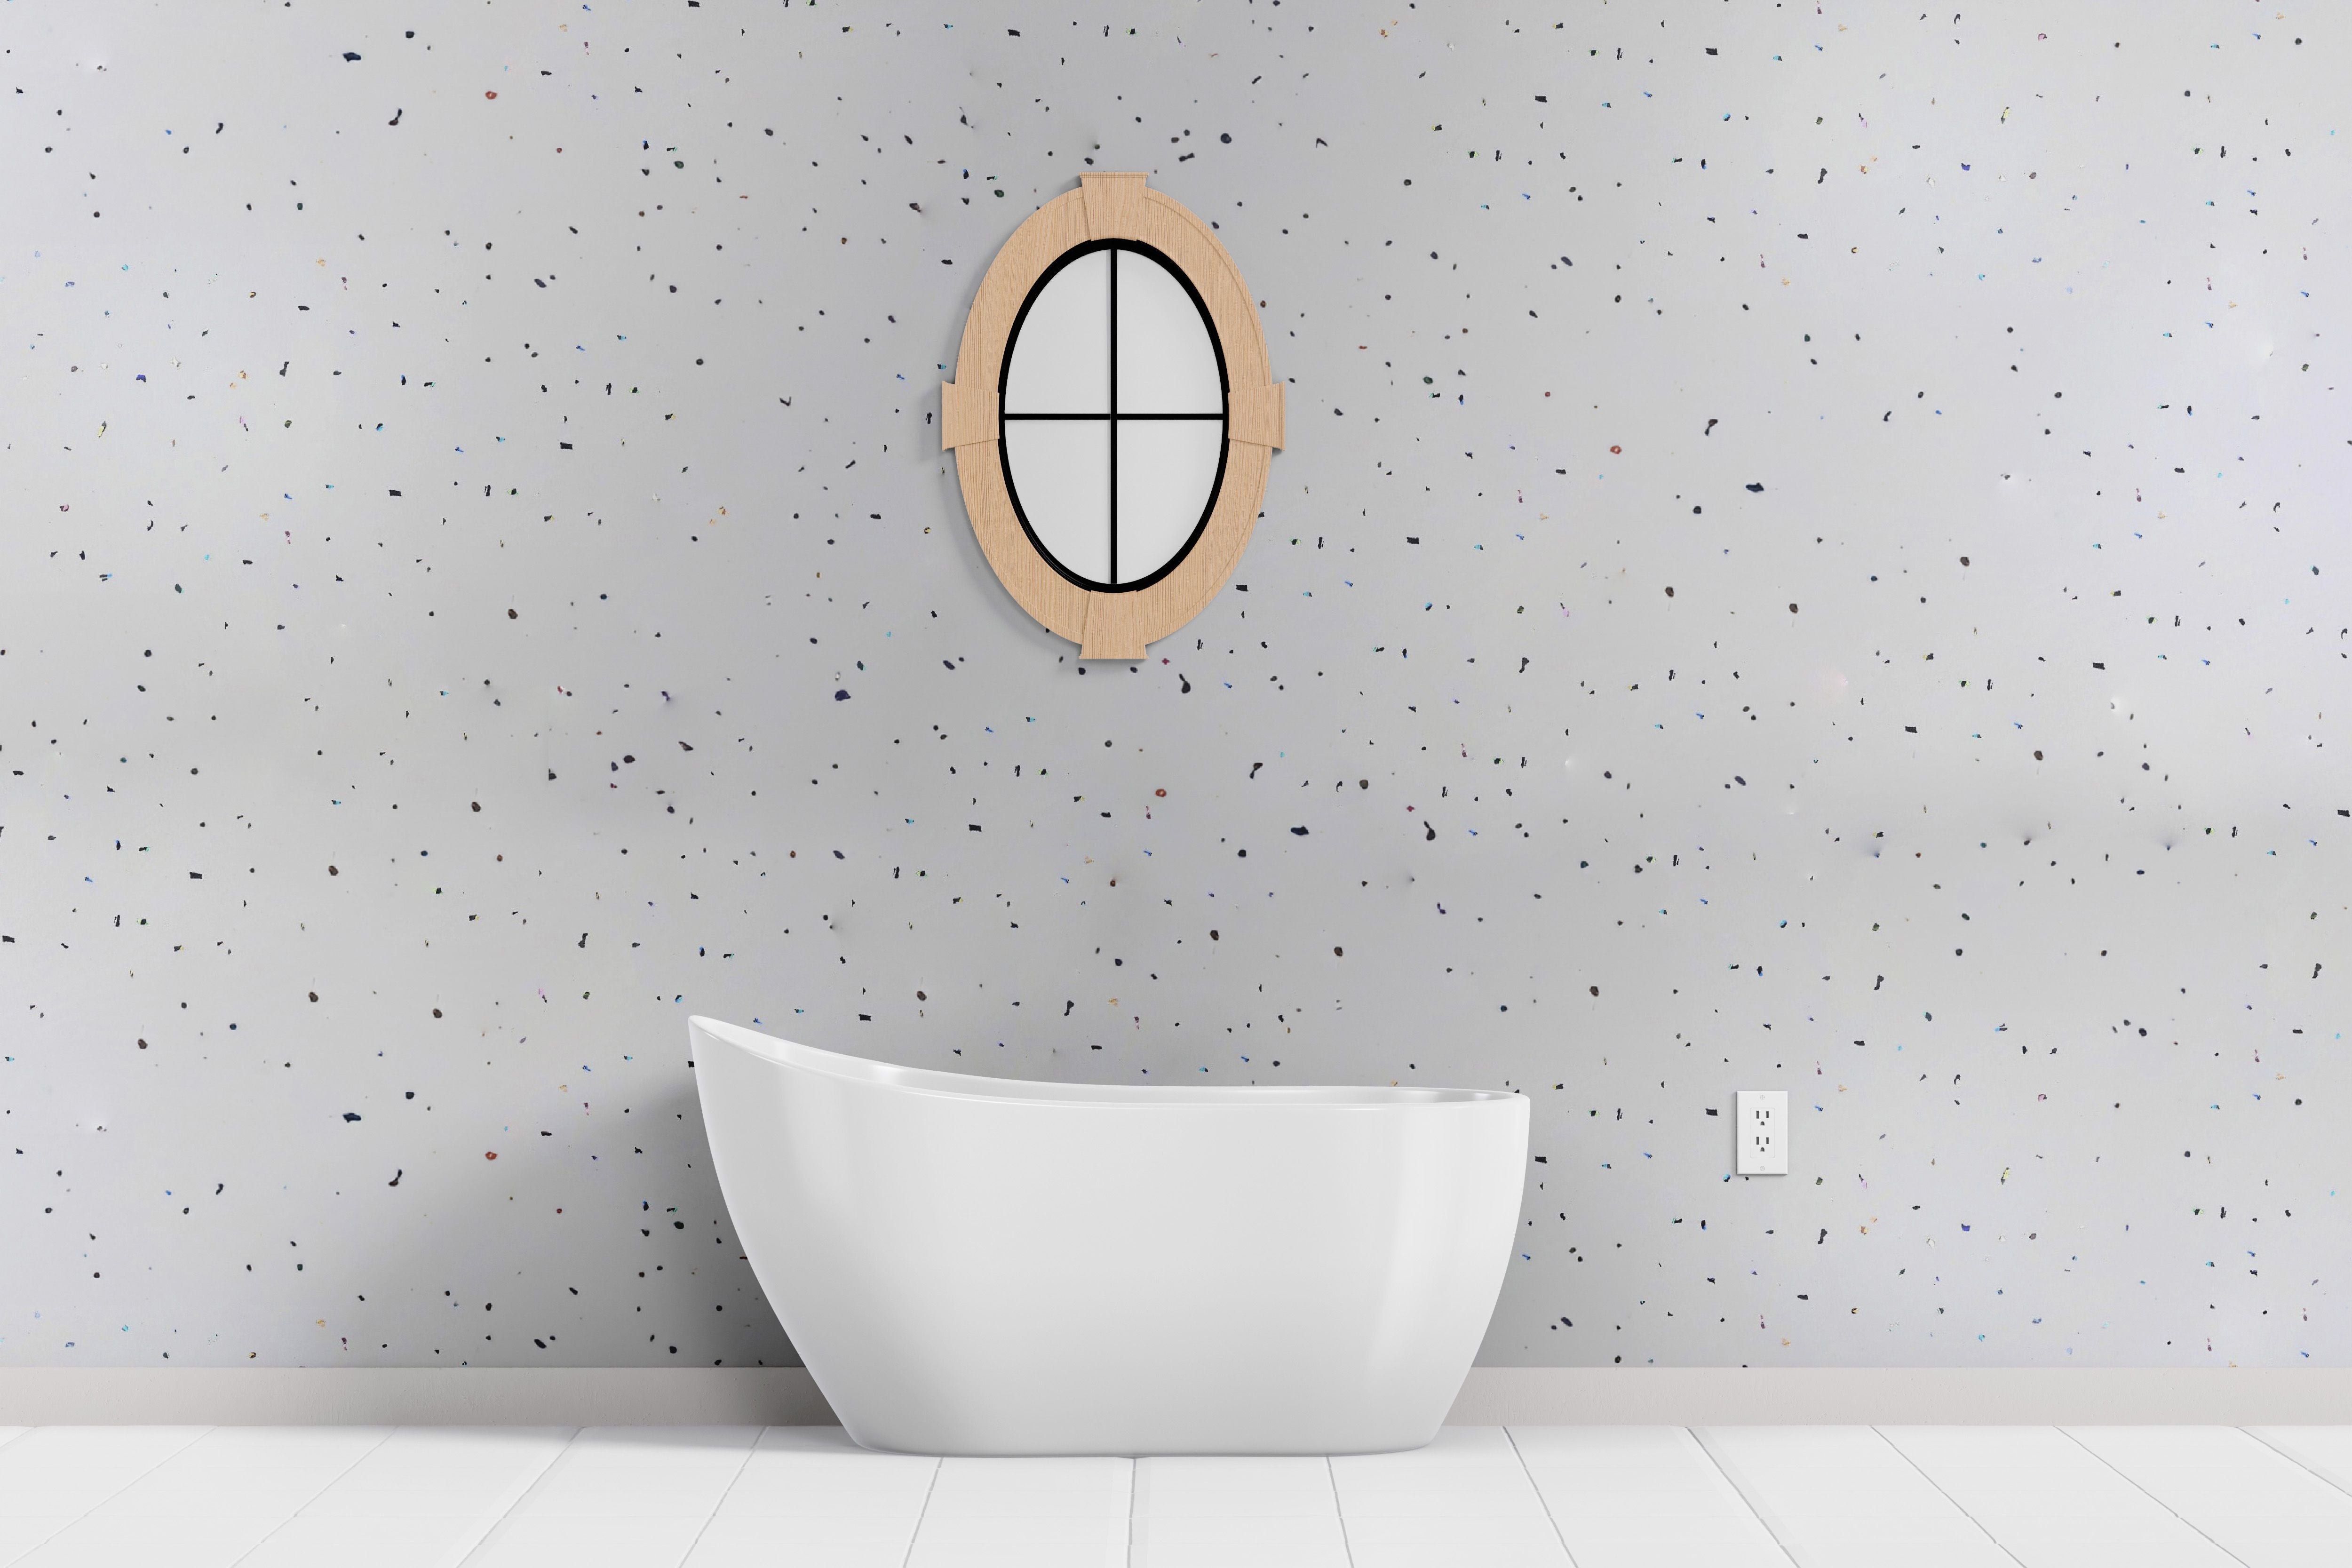 Our 10mm Shower Panels are a low-cost alternative to tiles. They are 2.4m x 1m meaning less joints to connect on installation. 